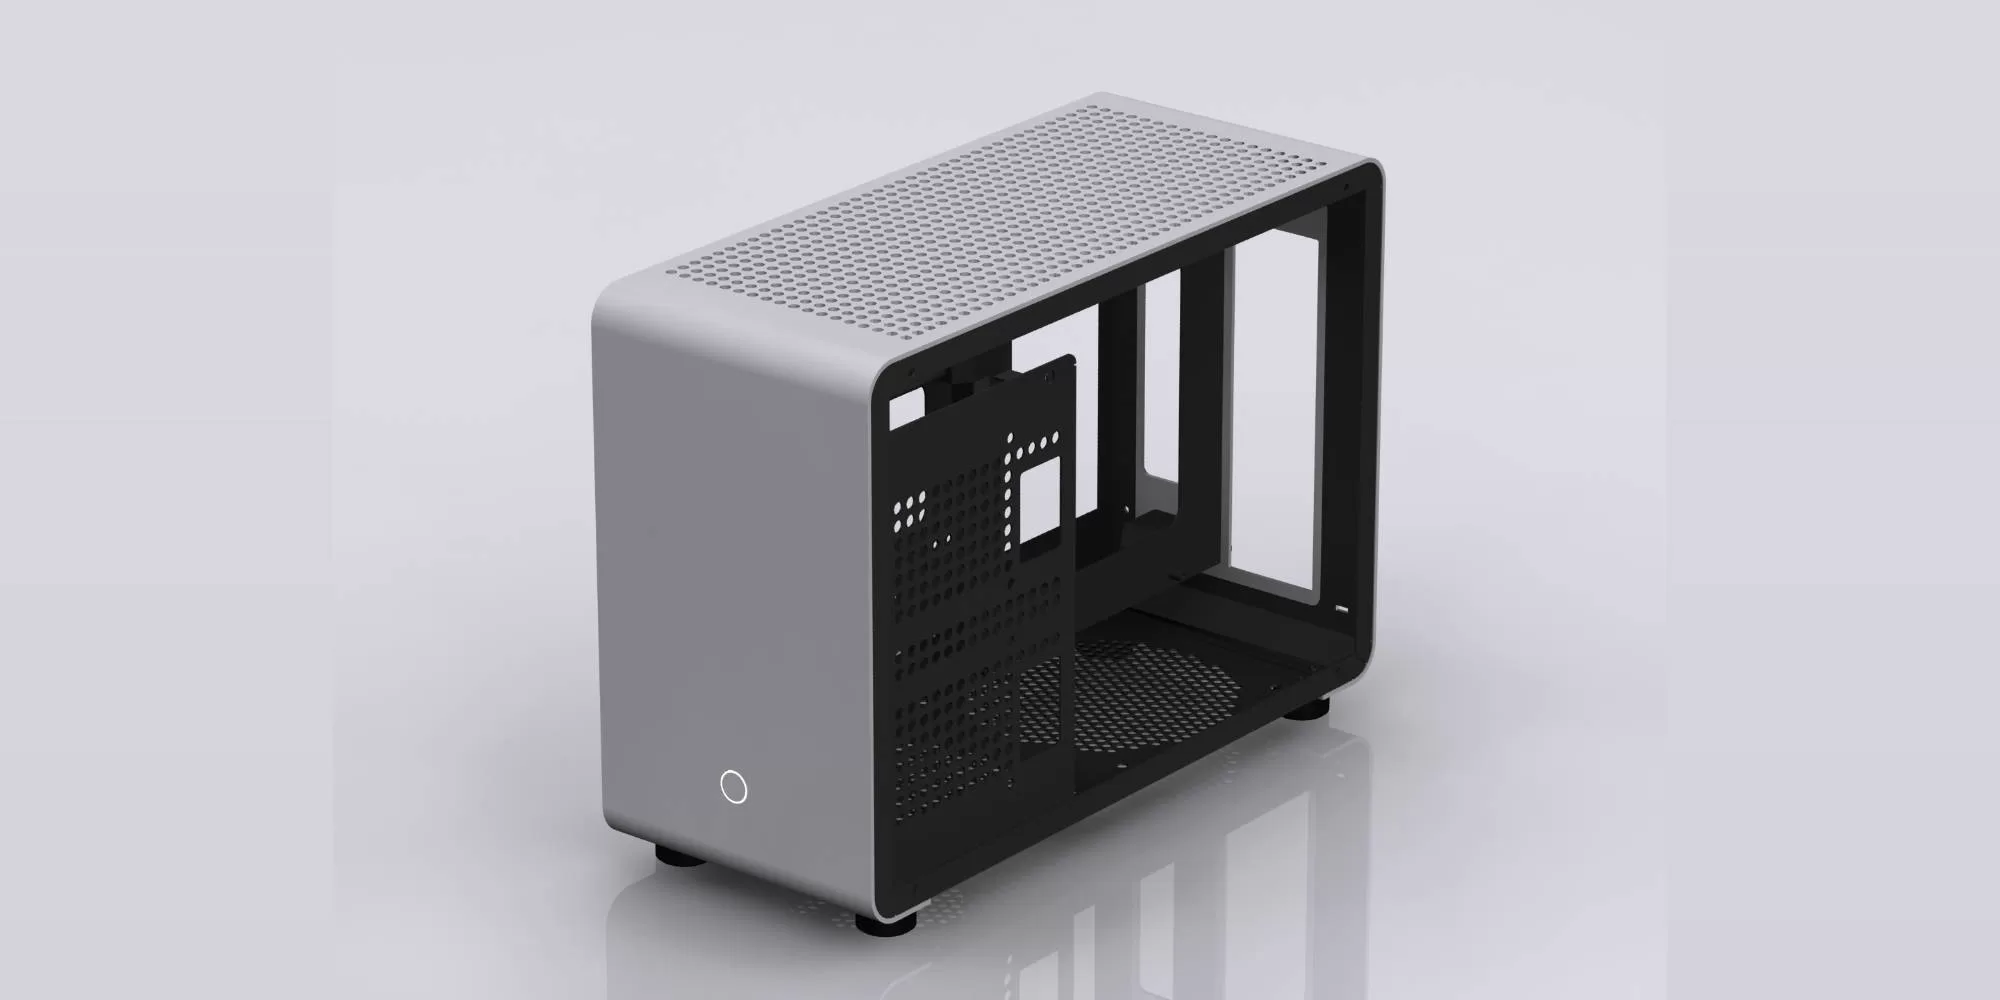 GEEEK’s new aluminium G1 mini-ITX case is up for pre-order